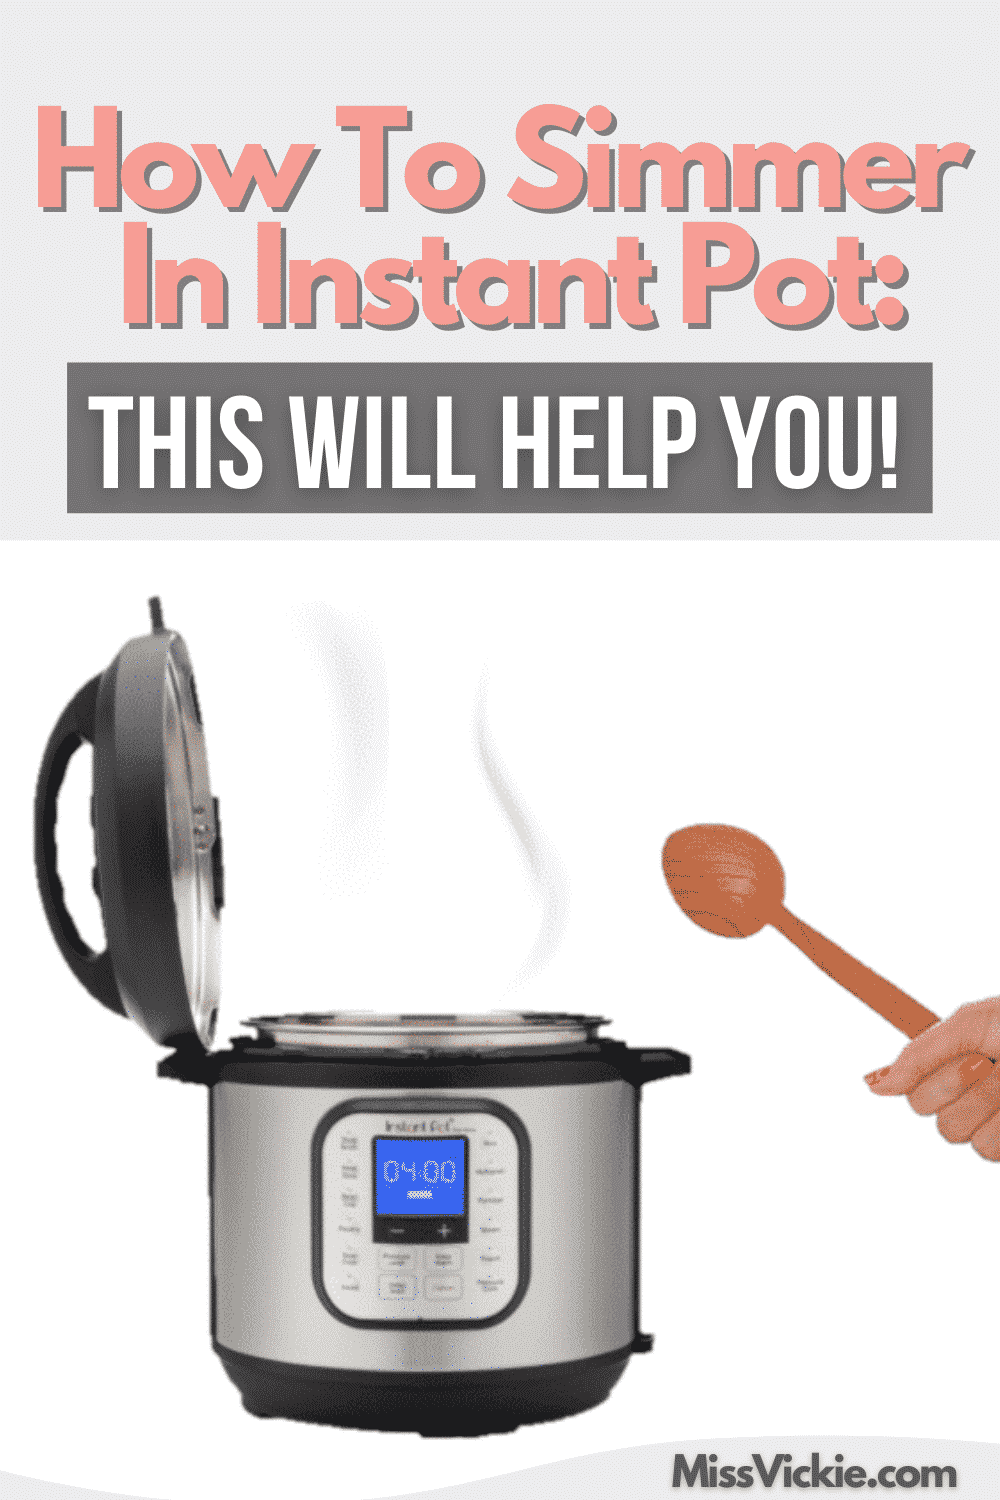 How To Simmer In Instant Pot